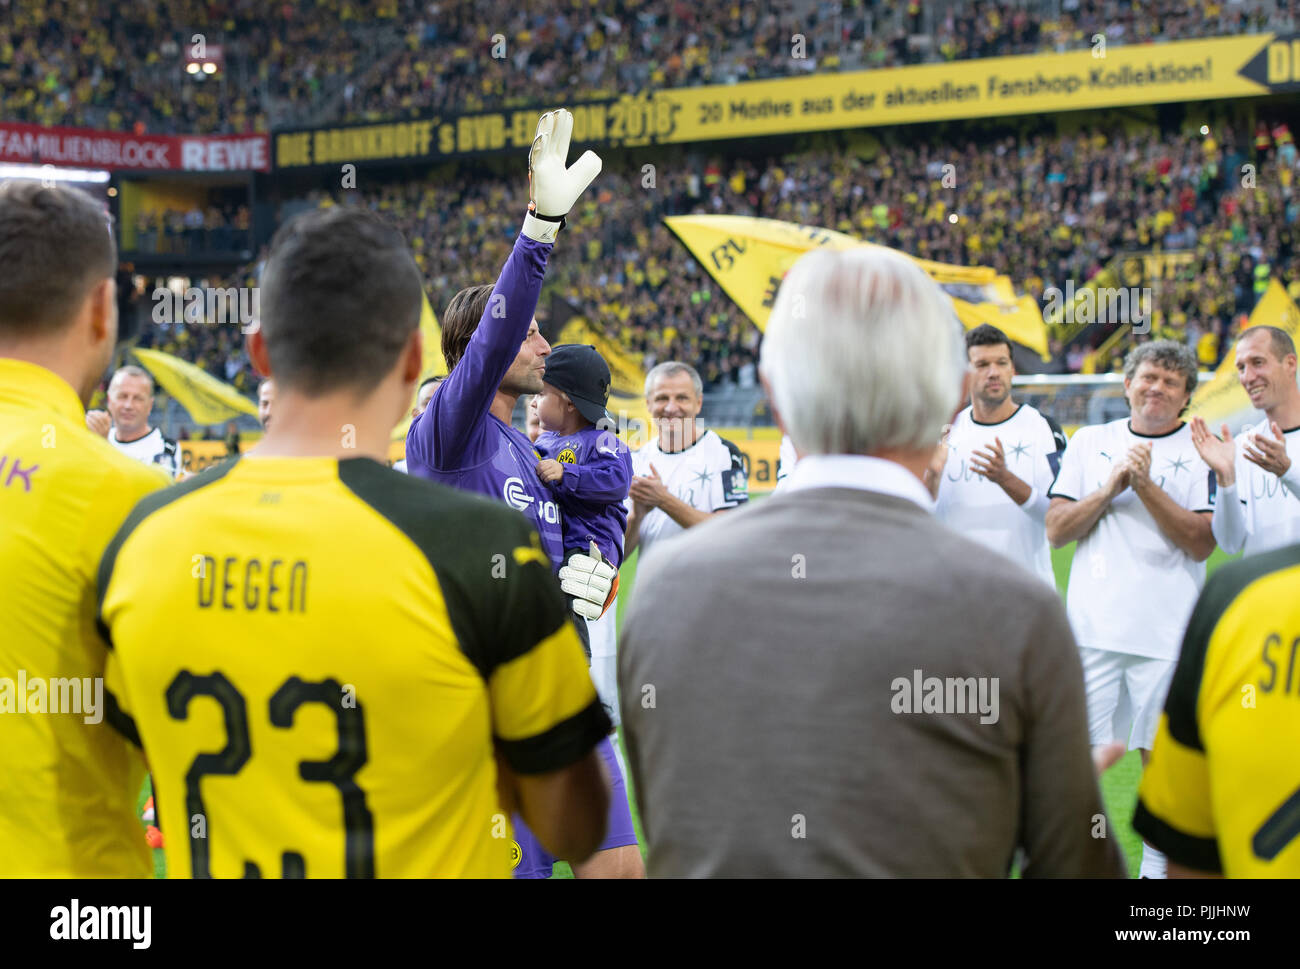 Dortmund, Germany. 07th Sep, 2018. Soccer: Goalkeeper Roman Weidenfeller walks through a trellis into the stadium for his farewell match with his son on his arm and waves. Credit: Bernd Thissen/dpa/Alamy Live News Stock Photo